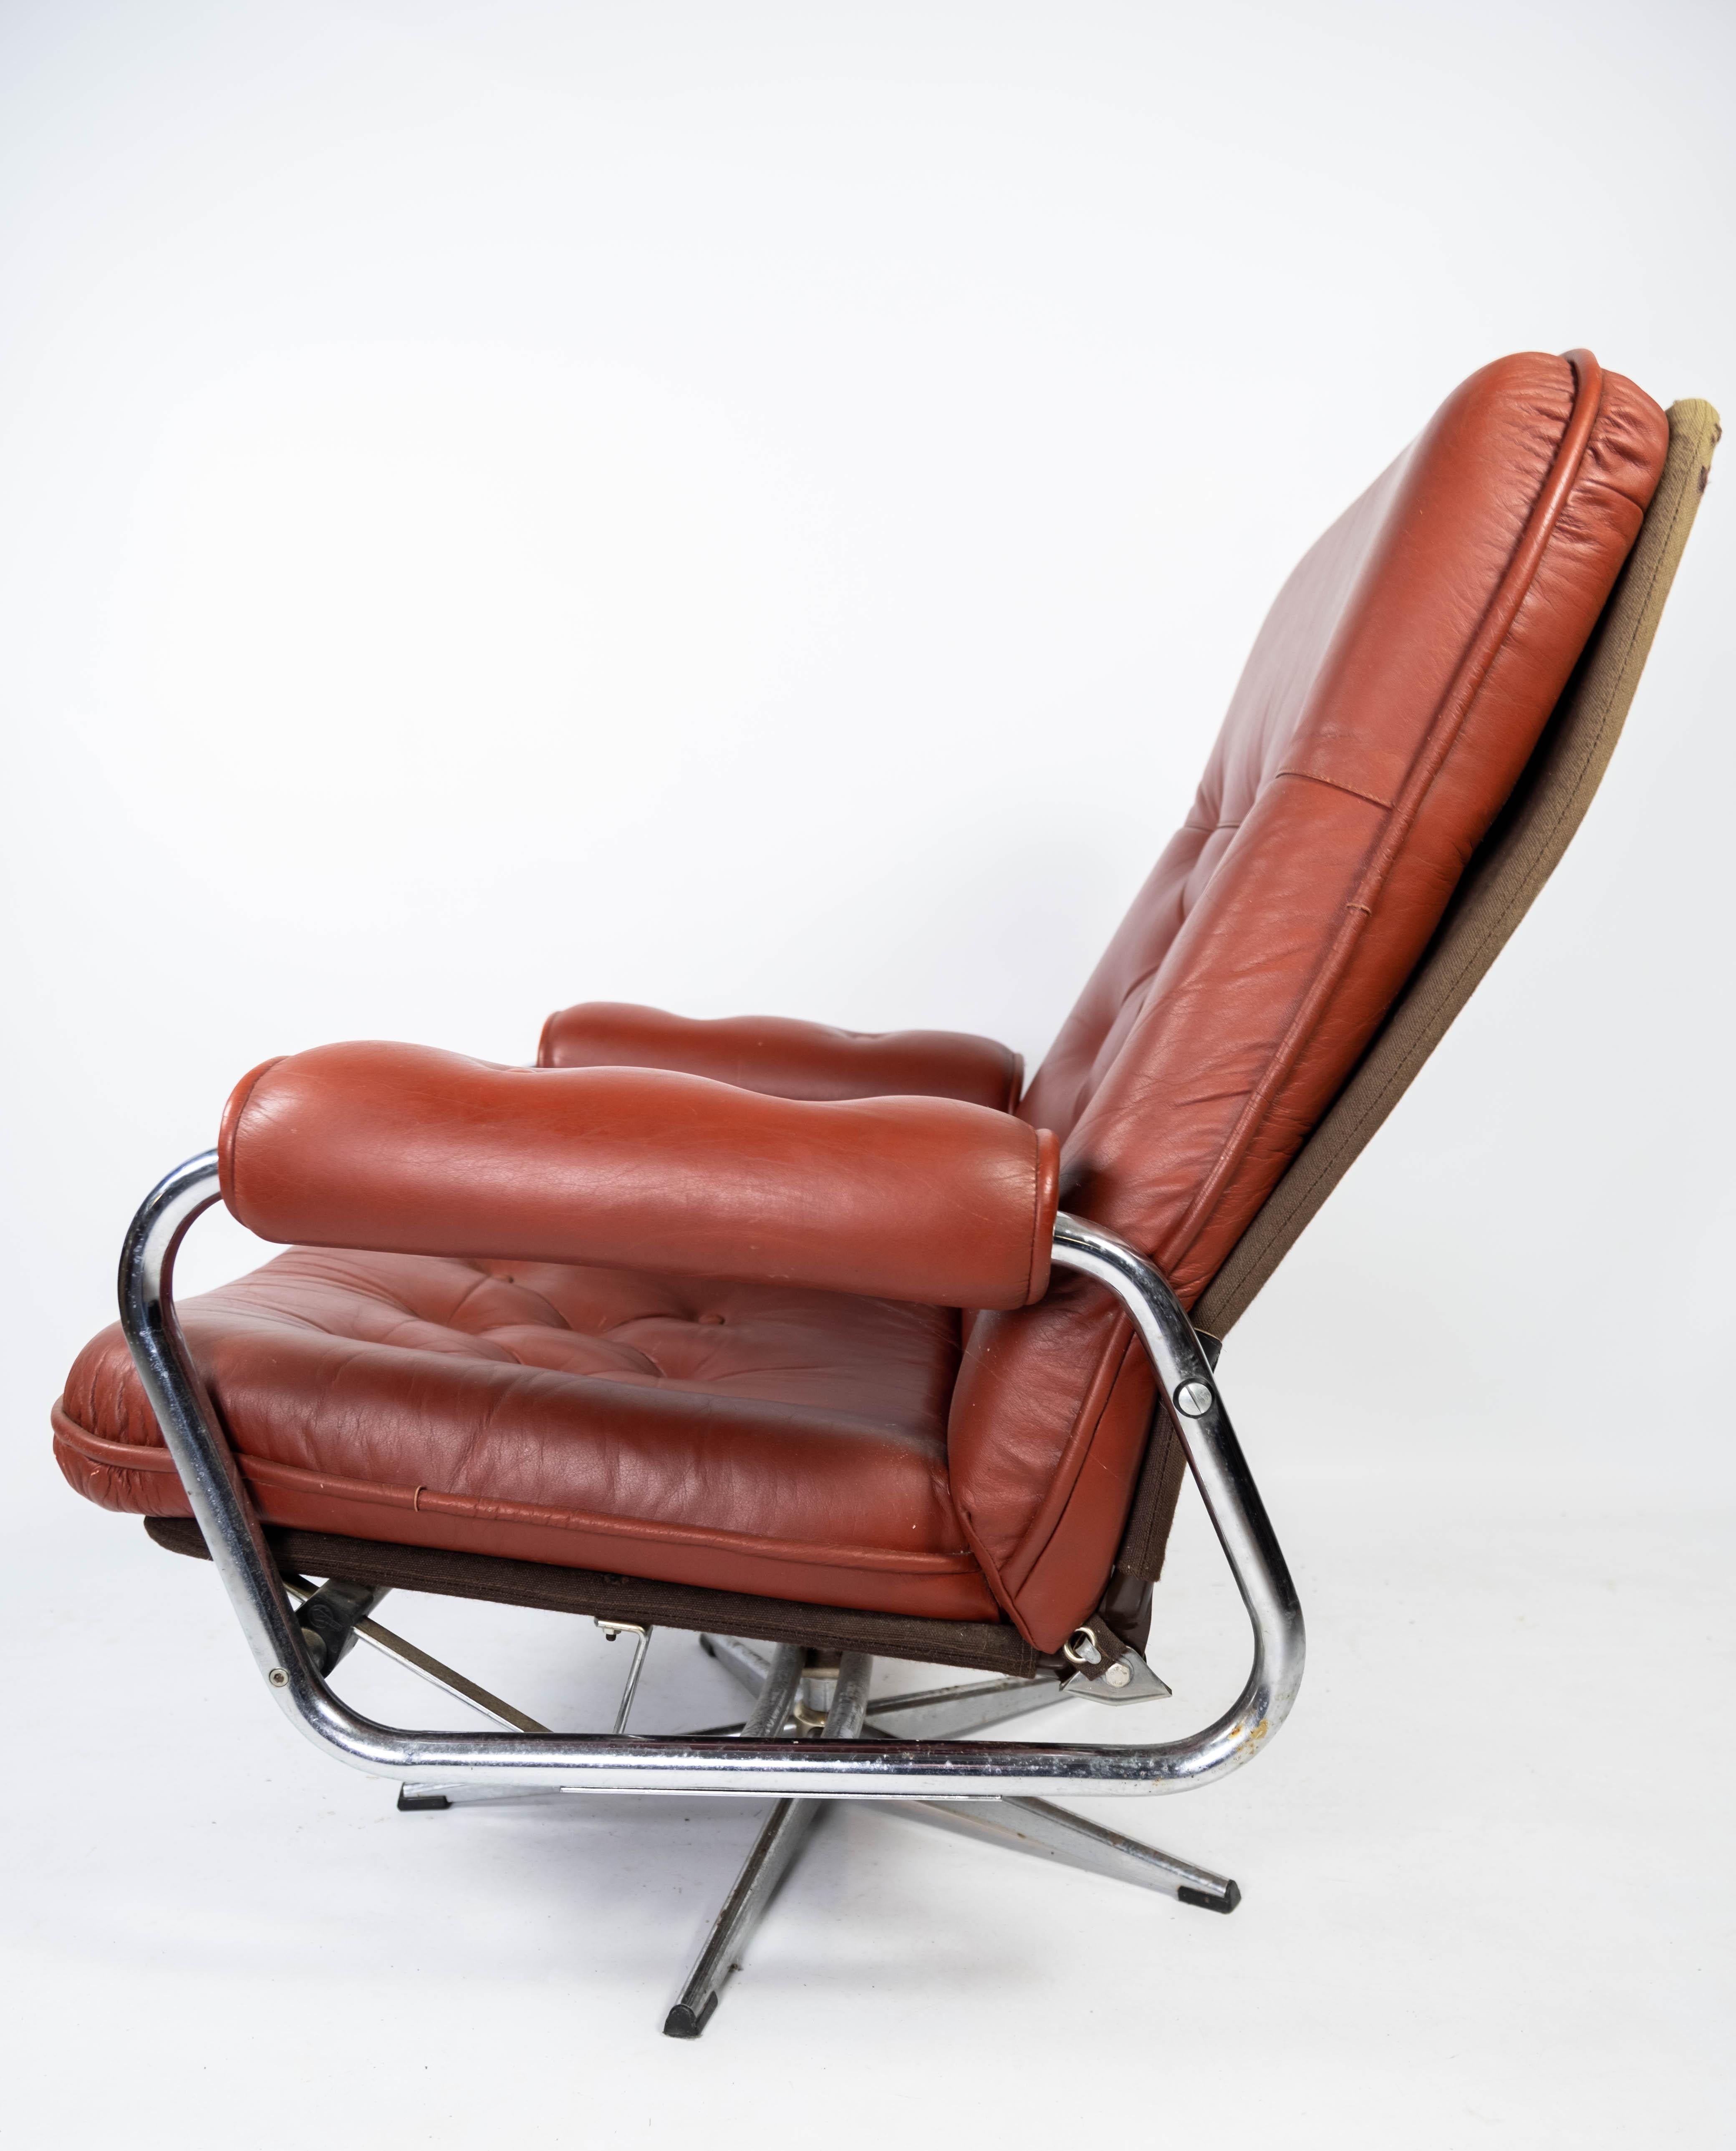 Armchair Upholstered with Red Leather and Frame of Metal, of Danish Design, 1960 For Sale 3